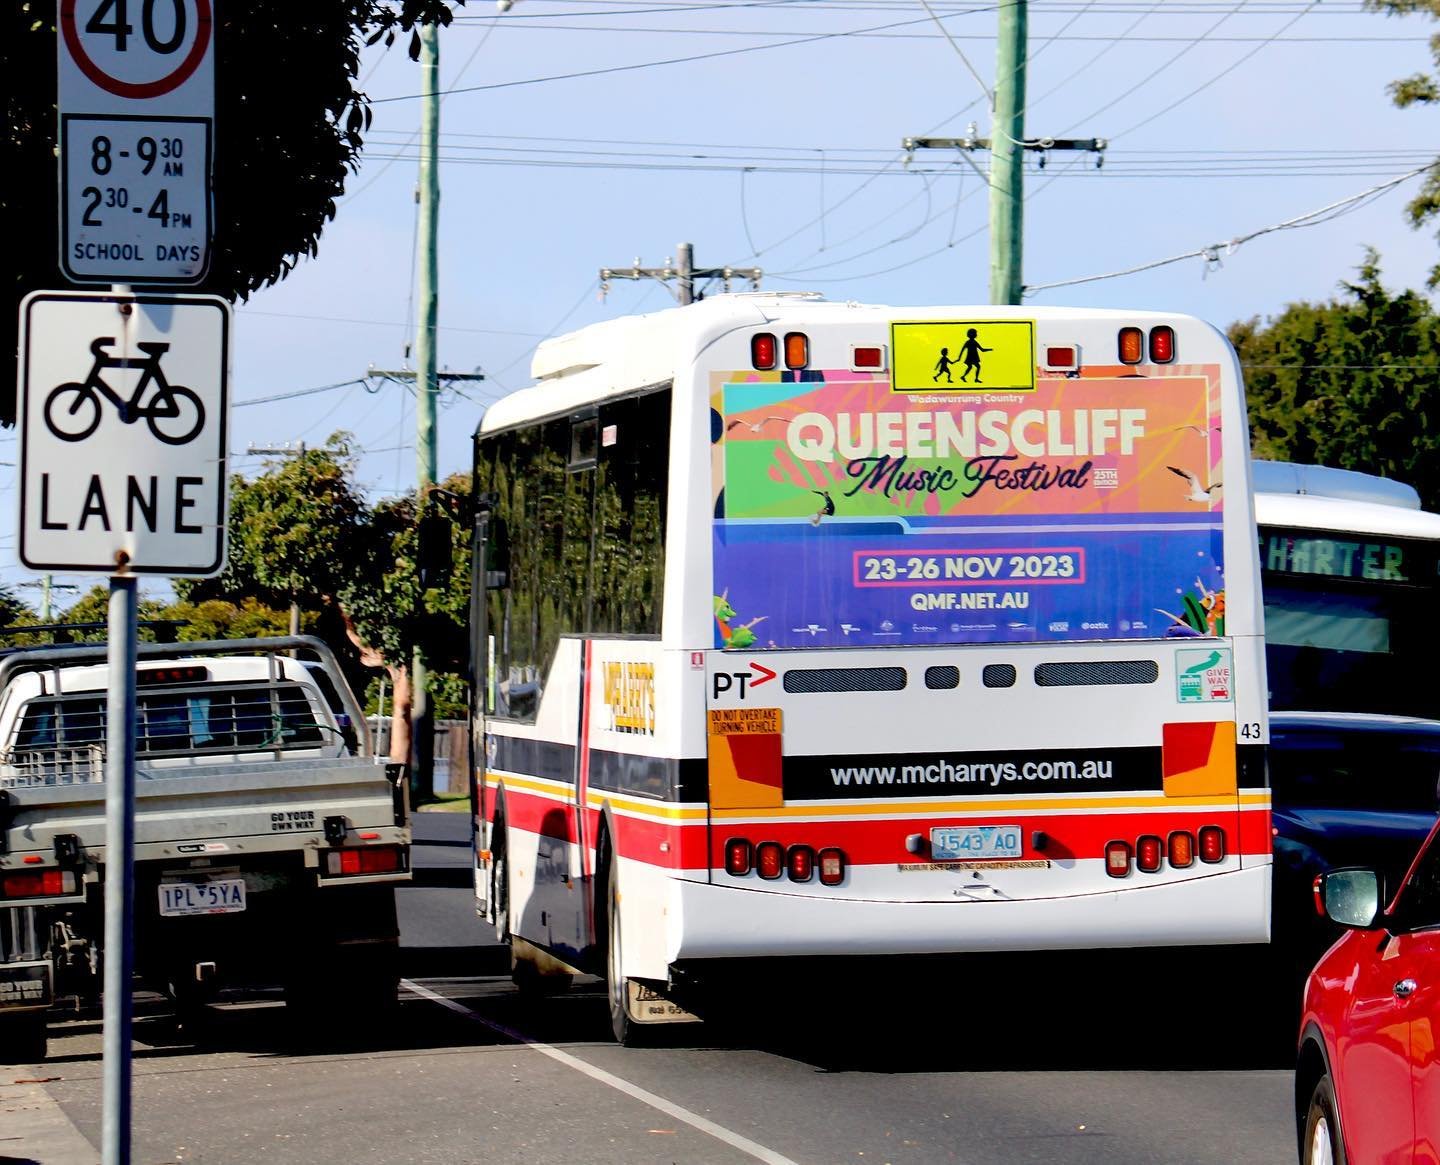 🚌 Advertise with us and reach thousands on the move! 🌟 Capture attention with our bus back advertising spaces. 📈 Whether you&rsquo;re promoting an event, business, or cause, our buses will carry your message across Geelong, the Bellarine Peninsula